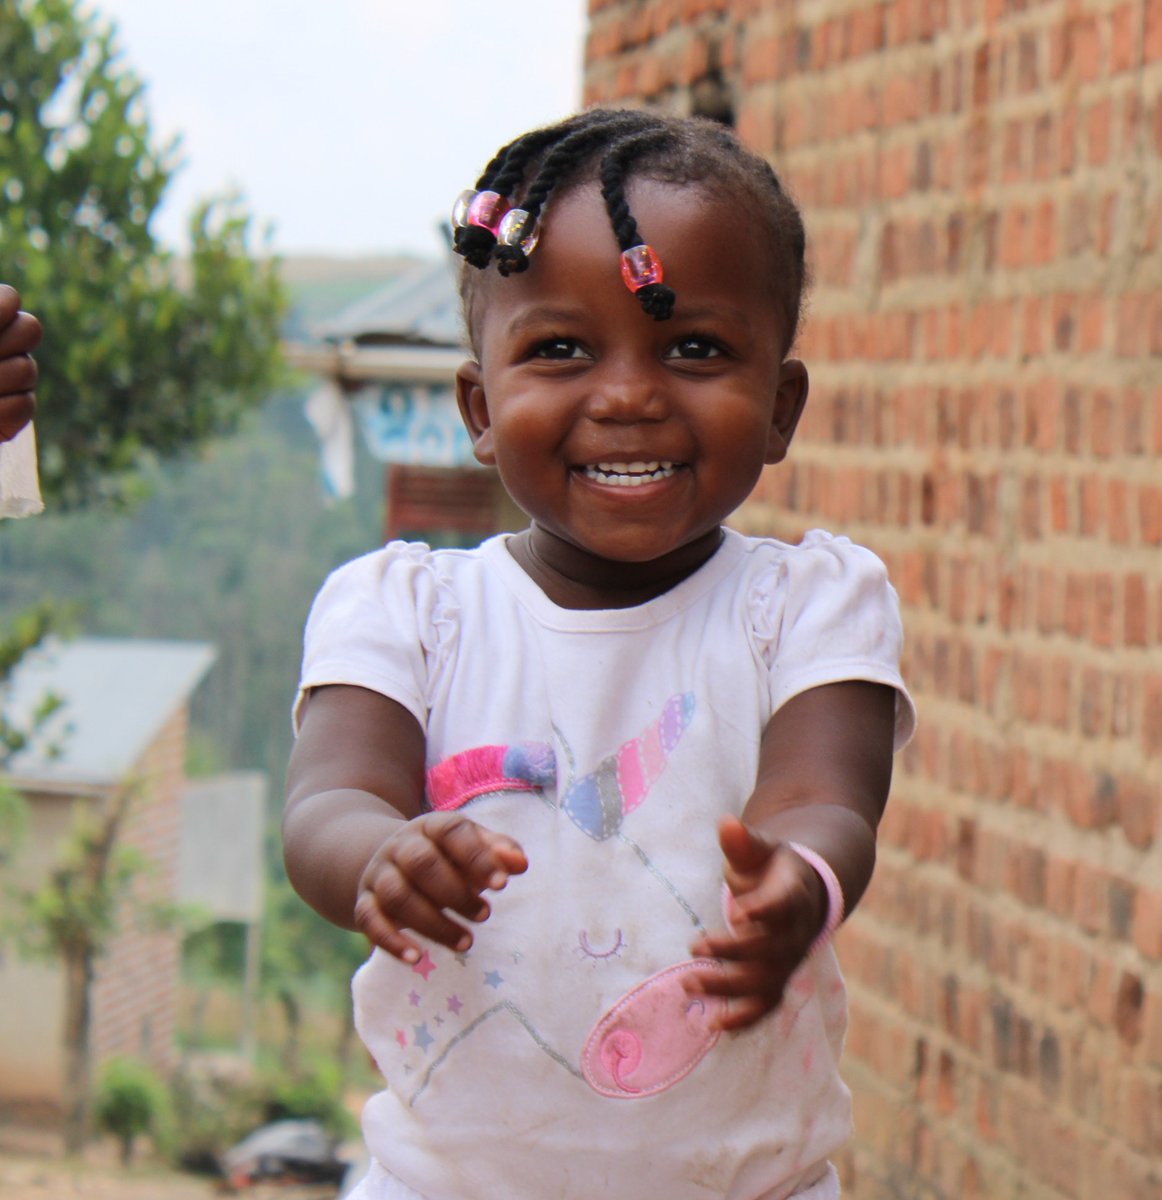 Today's Saturday Smile comes from 2-year-old Destiny. 😄 Destiny lives in our Uganda foster care program where she brings sunshine and laughter to her foster family. She's happy, healthy, and so loved -- just like every child deserves! 💚

#SaturdaySmile #fostercare